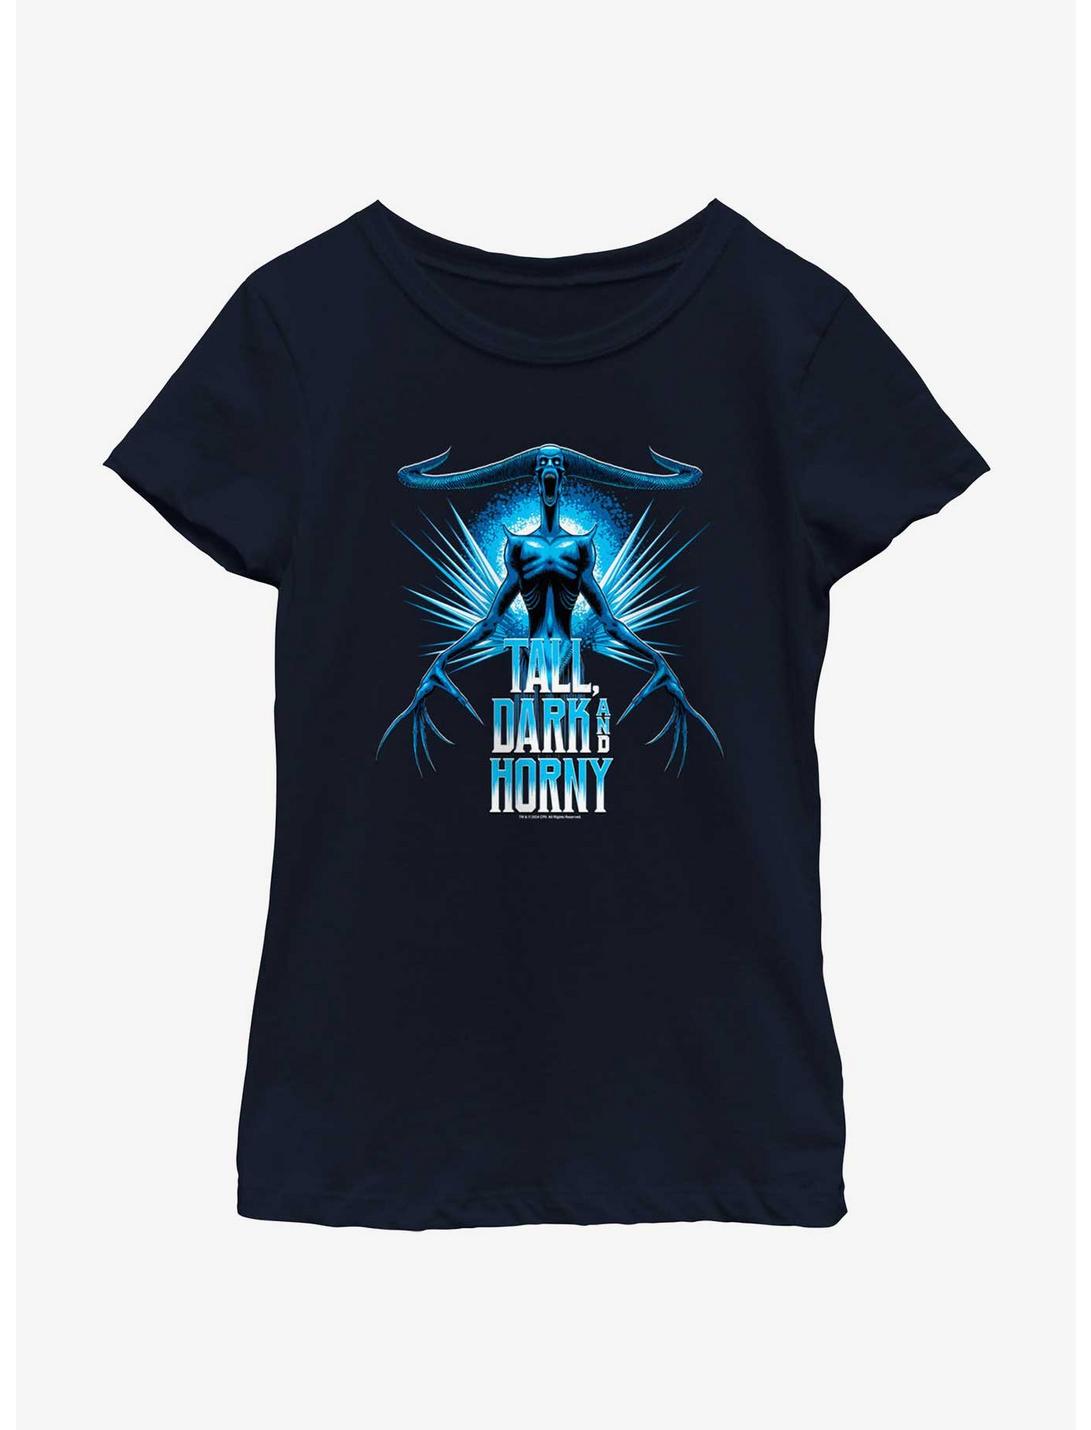 Ghostbusters: Frozen Empire Tall Dark And Horny Girls Youth T-Shirt, NAVY, hi-res